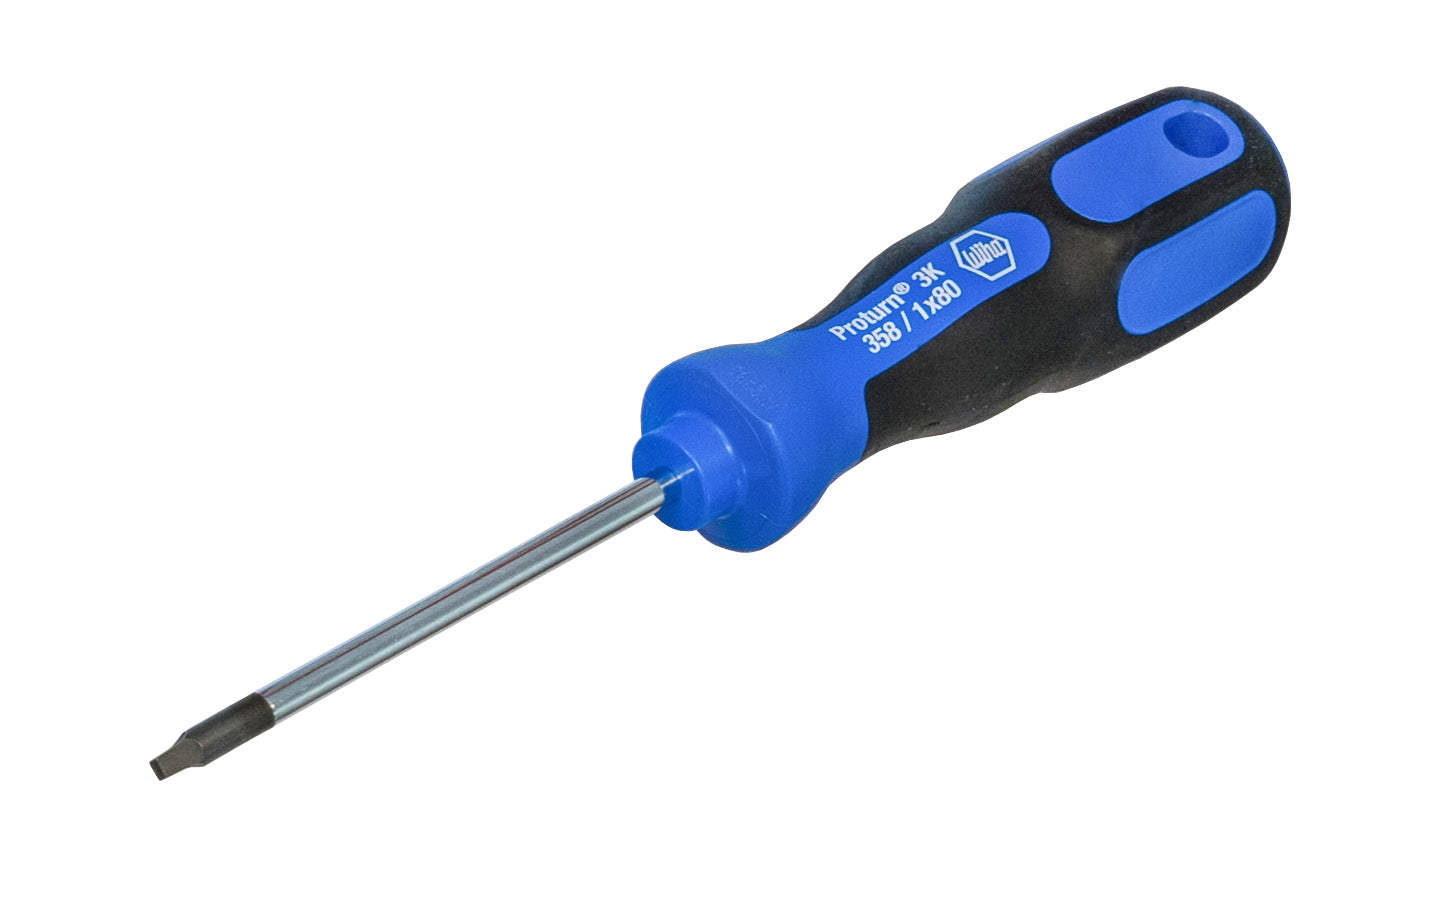 High quality Wiha No. 1 square screwdriver made out of special CVM steel that is 60 HRC hardened durability. Bright chrome shaft with soft grip ergonomic handle. Wiha Model No. 45831 - "Proturn" 3K 358 / #1x80.   Made in Germany - No. 1 SQ Screwdriver - Blue Handle - 084705458311 - # 1 Square Screwdriver - German Made